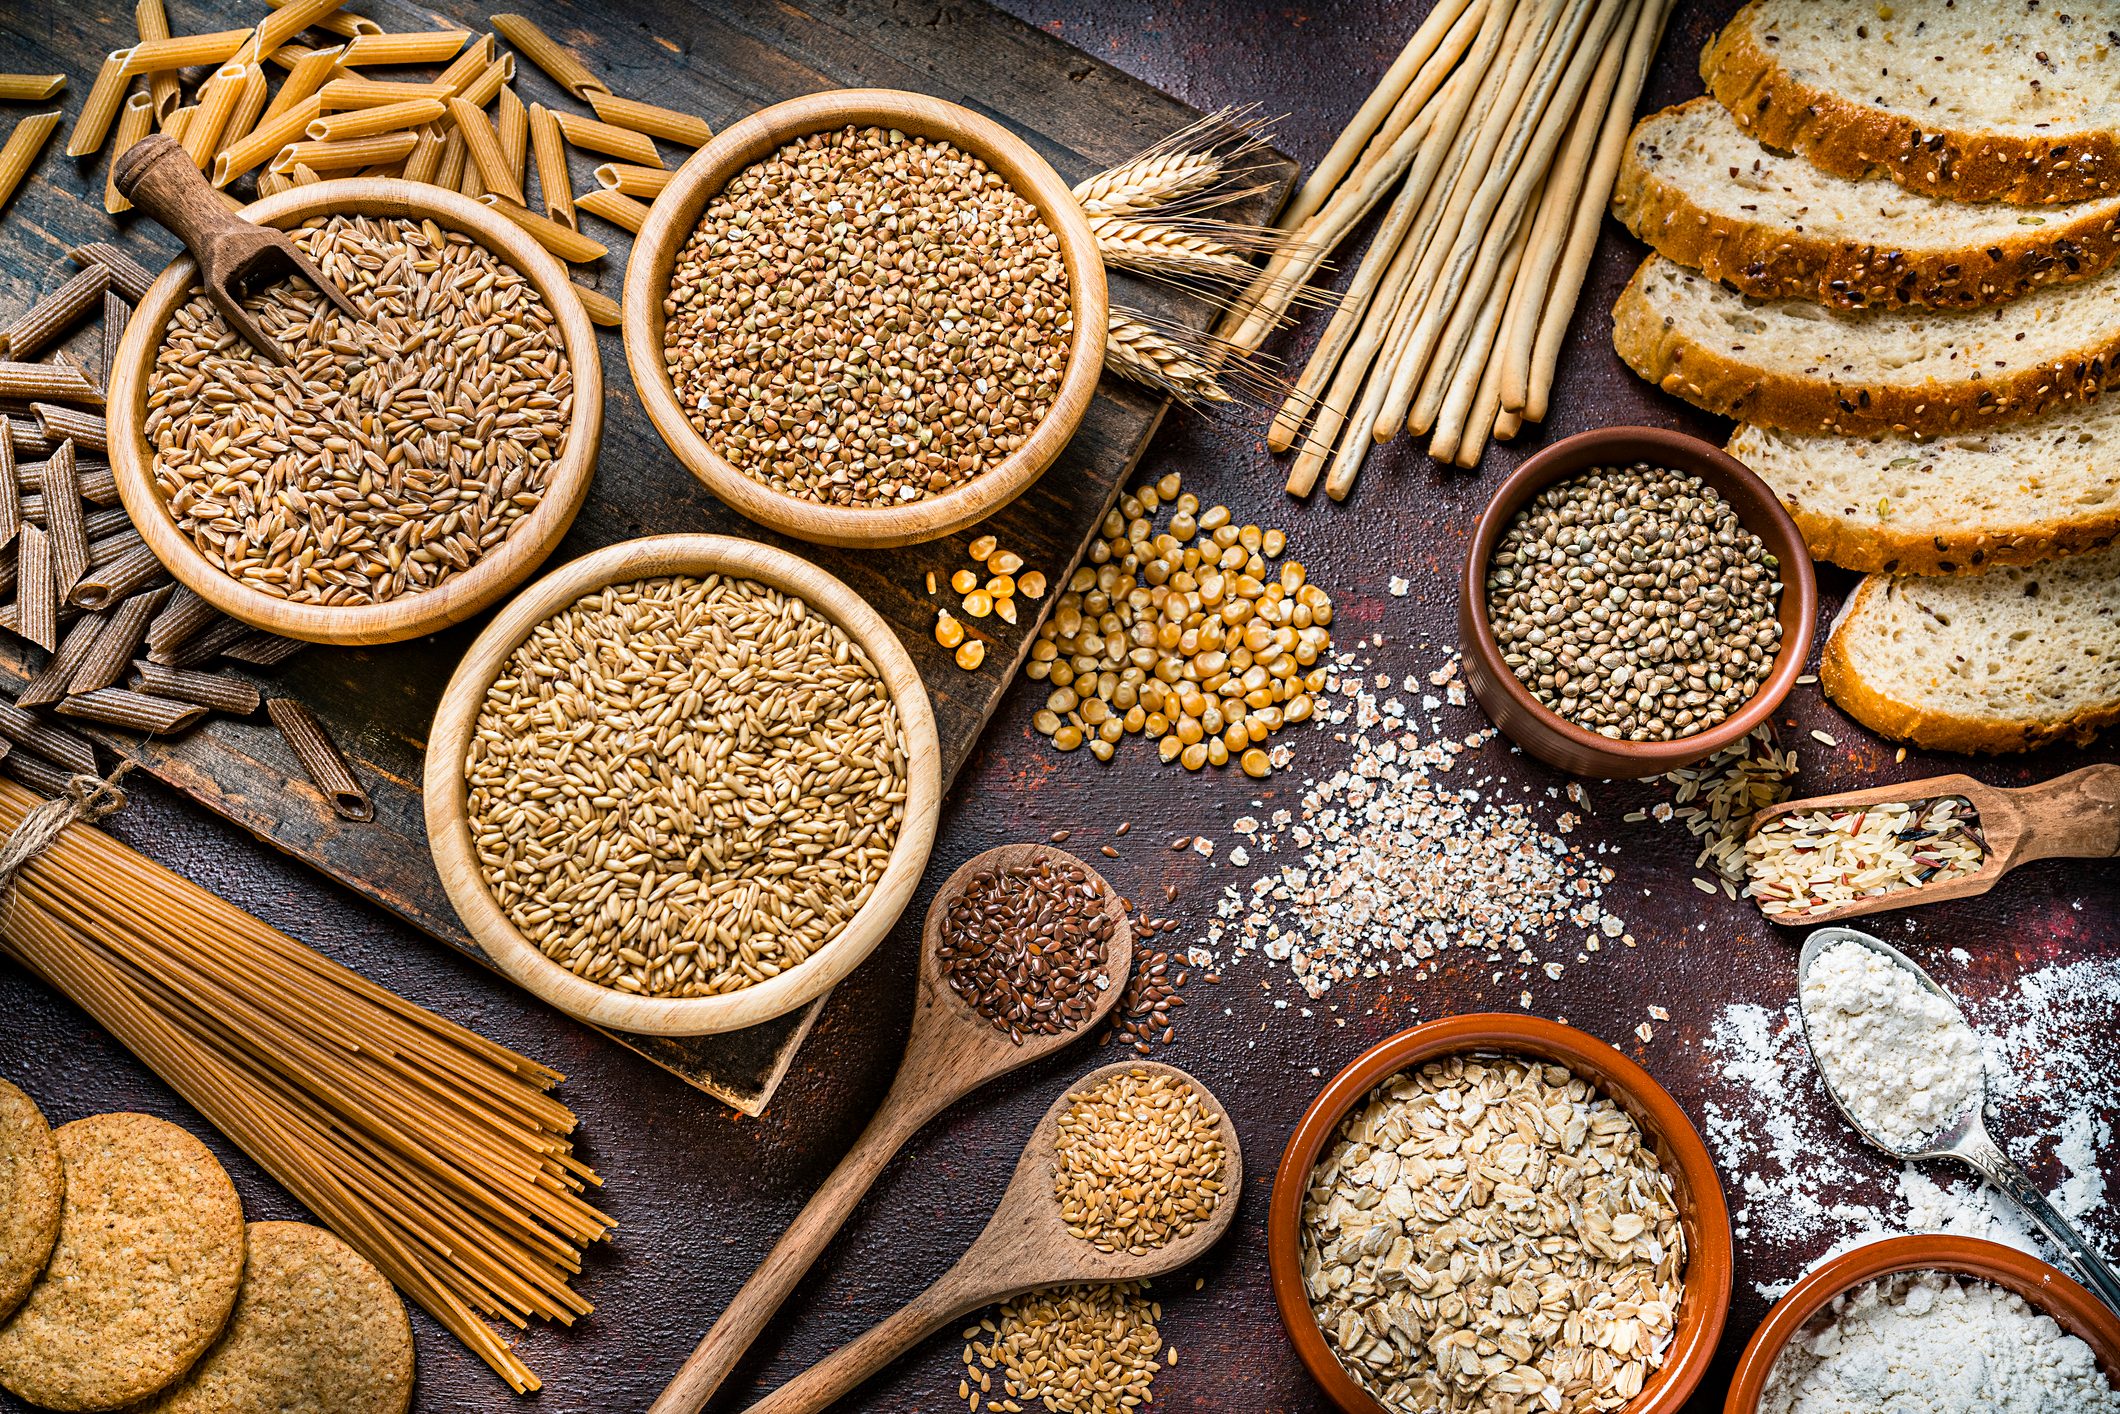 9 Gluten-Free Grains You Should Know About